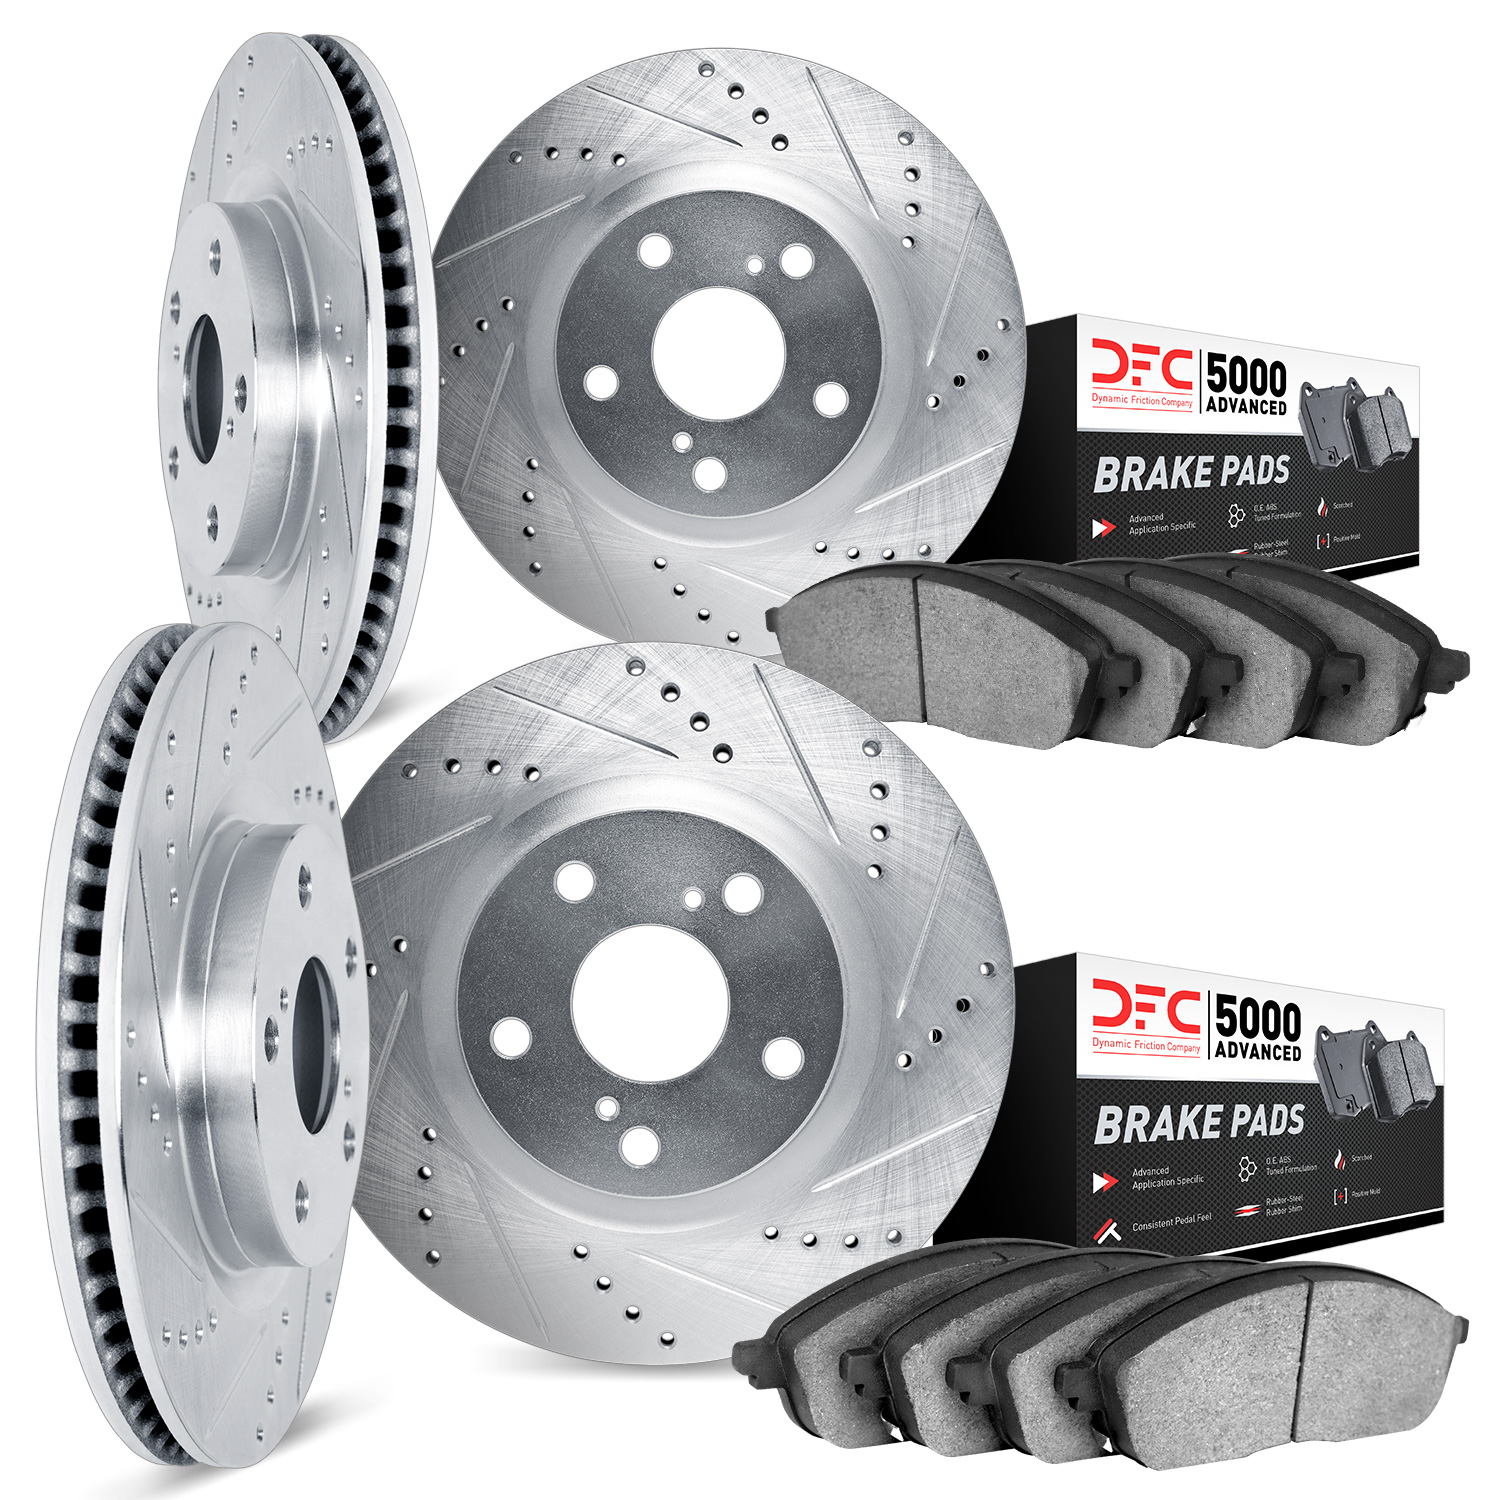 7504-68006 Drilled/Slotted Brake Rotors w/5000 Advanced Brake Pads Kit [Silver], 2014-2014 Infiniti/Nissan, Position: Front and